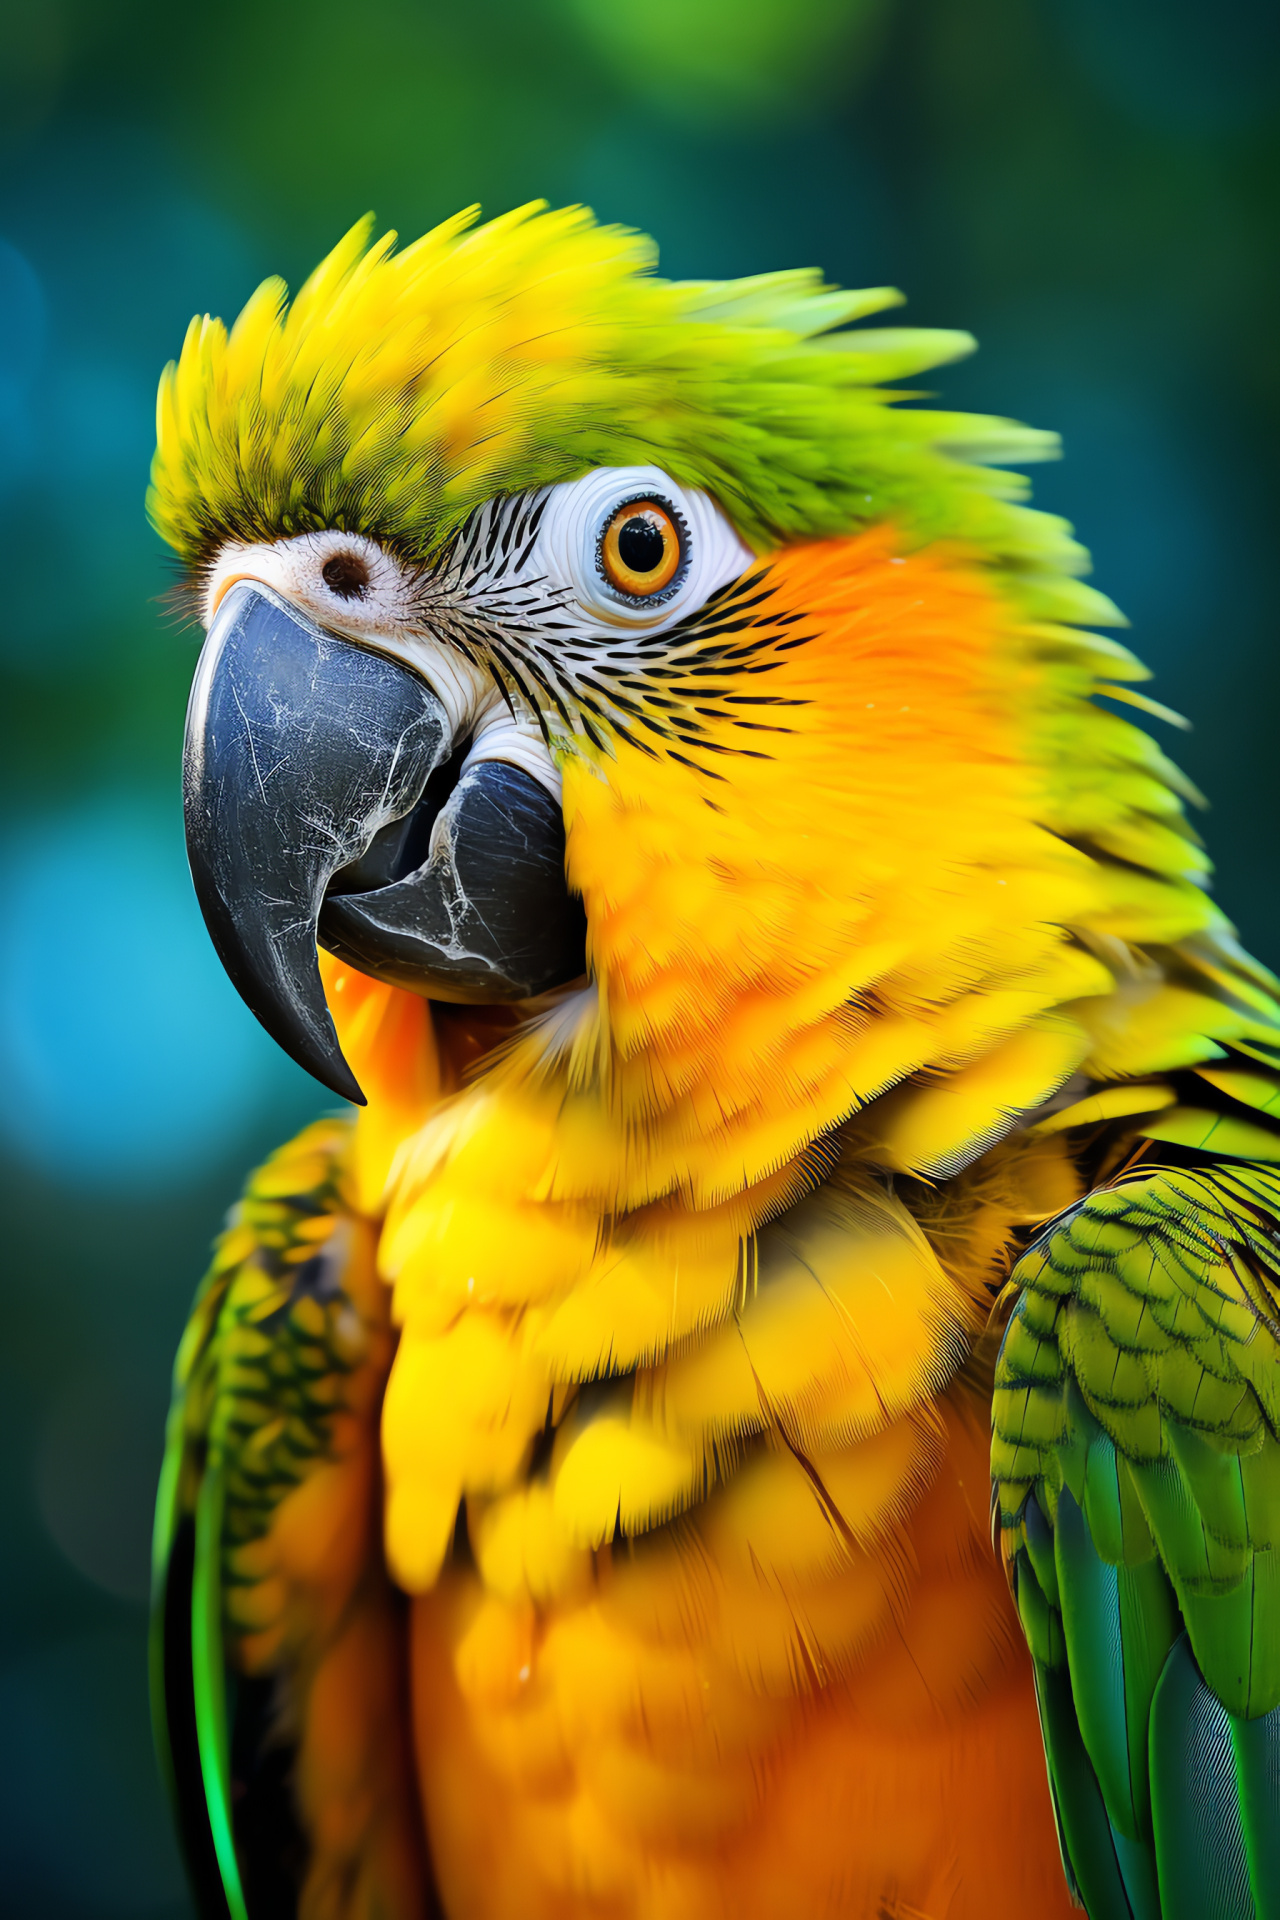 Parrot appearance, Yellow and green plumage, Dual-tone backdrop, Avian presentation, Tropical bird variation, HD Phone Image